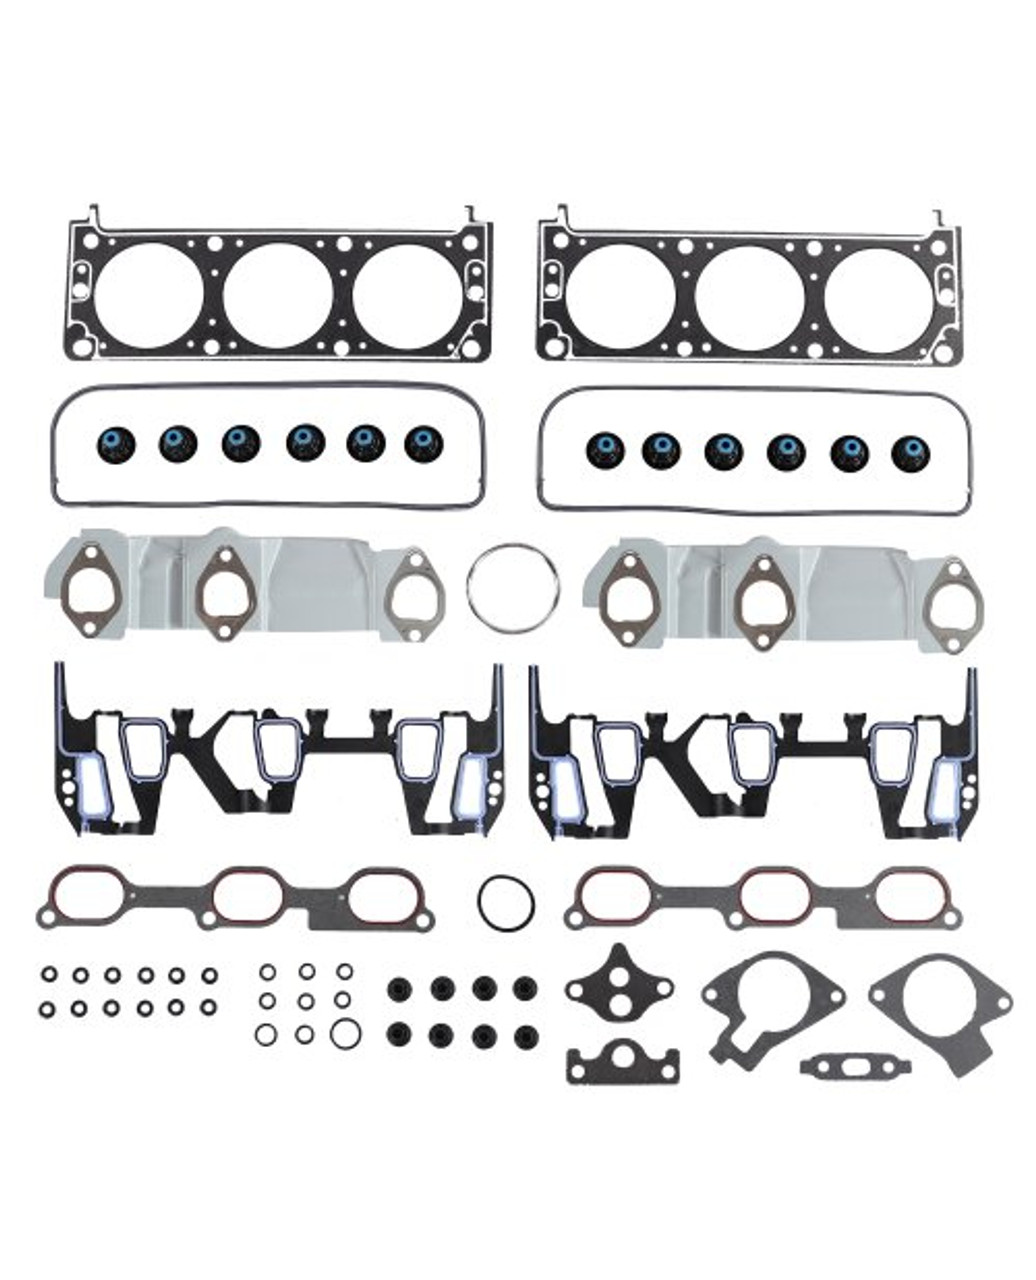 Head Gasket Set with Head Bolt Kit - 2000 Buick Century 3.1L Engine Parts # HGB31501ZE1